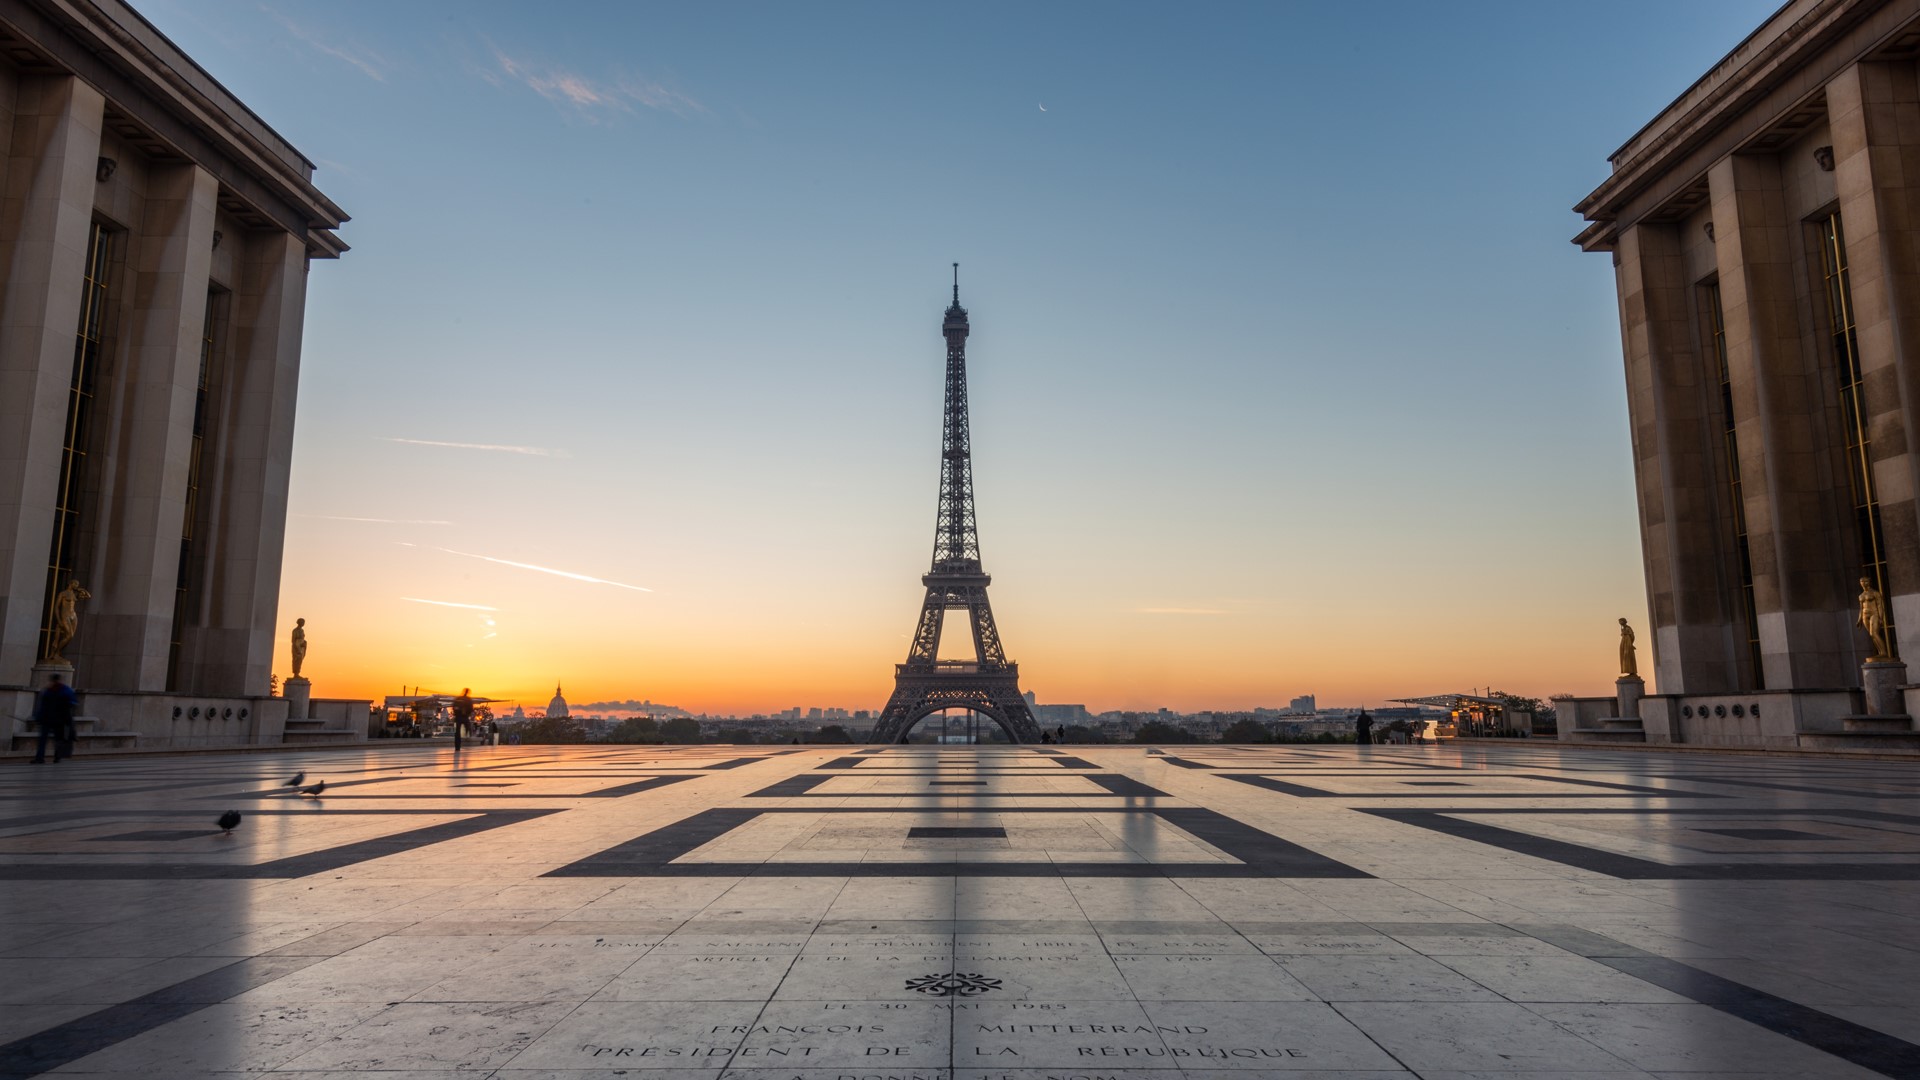 Image of the Eiffel Tower from a distance with a stunning sunset behind it